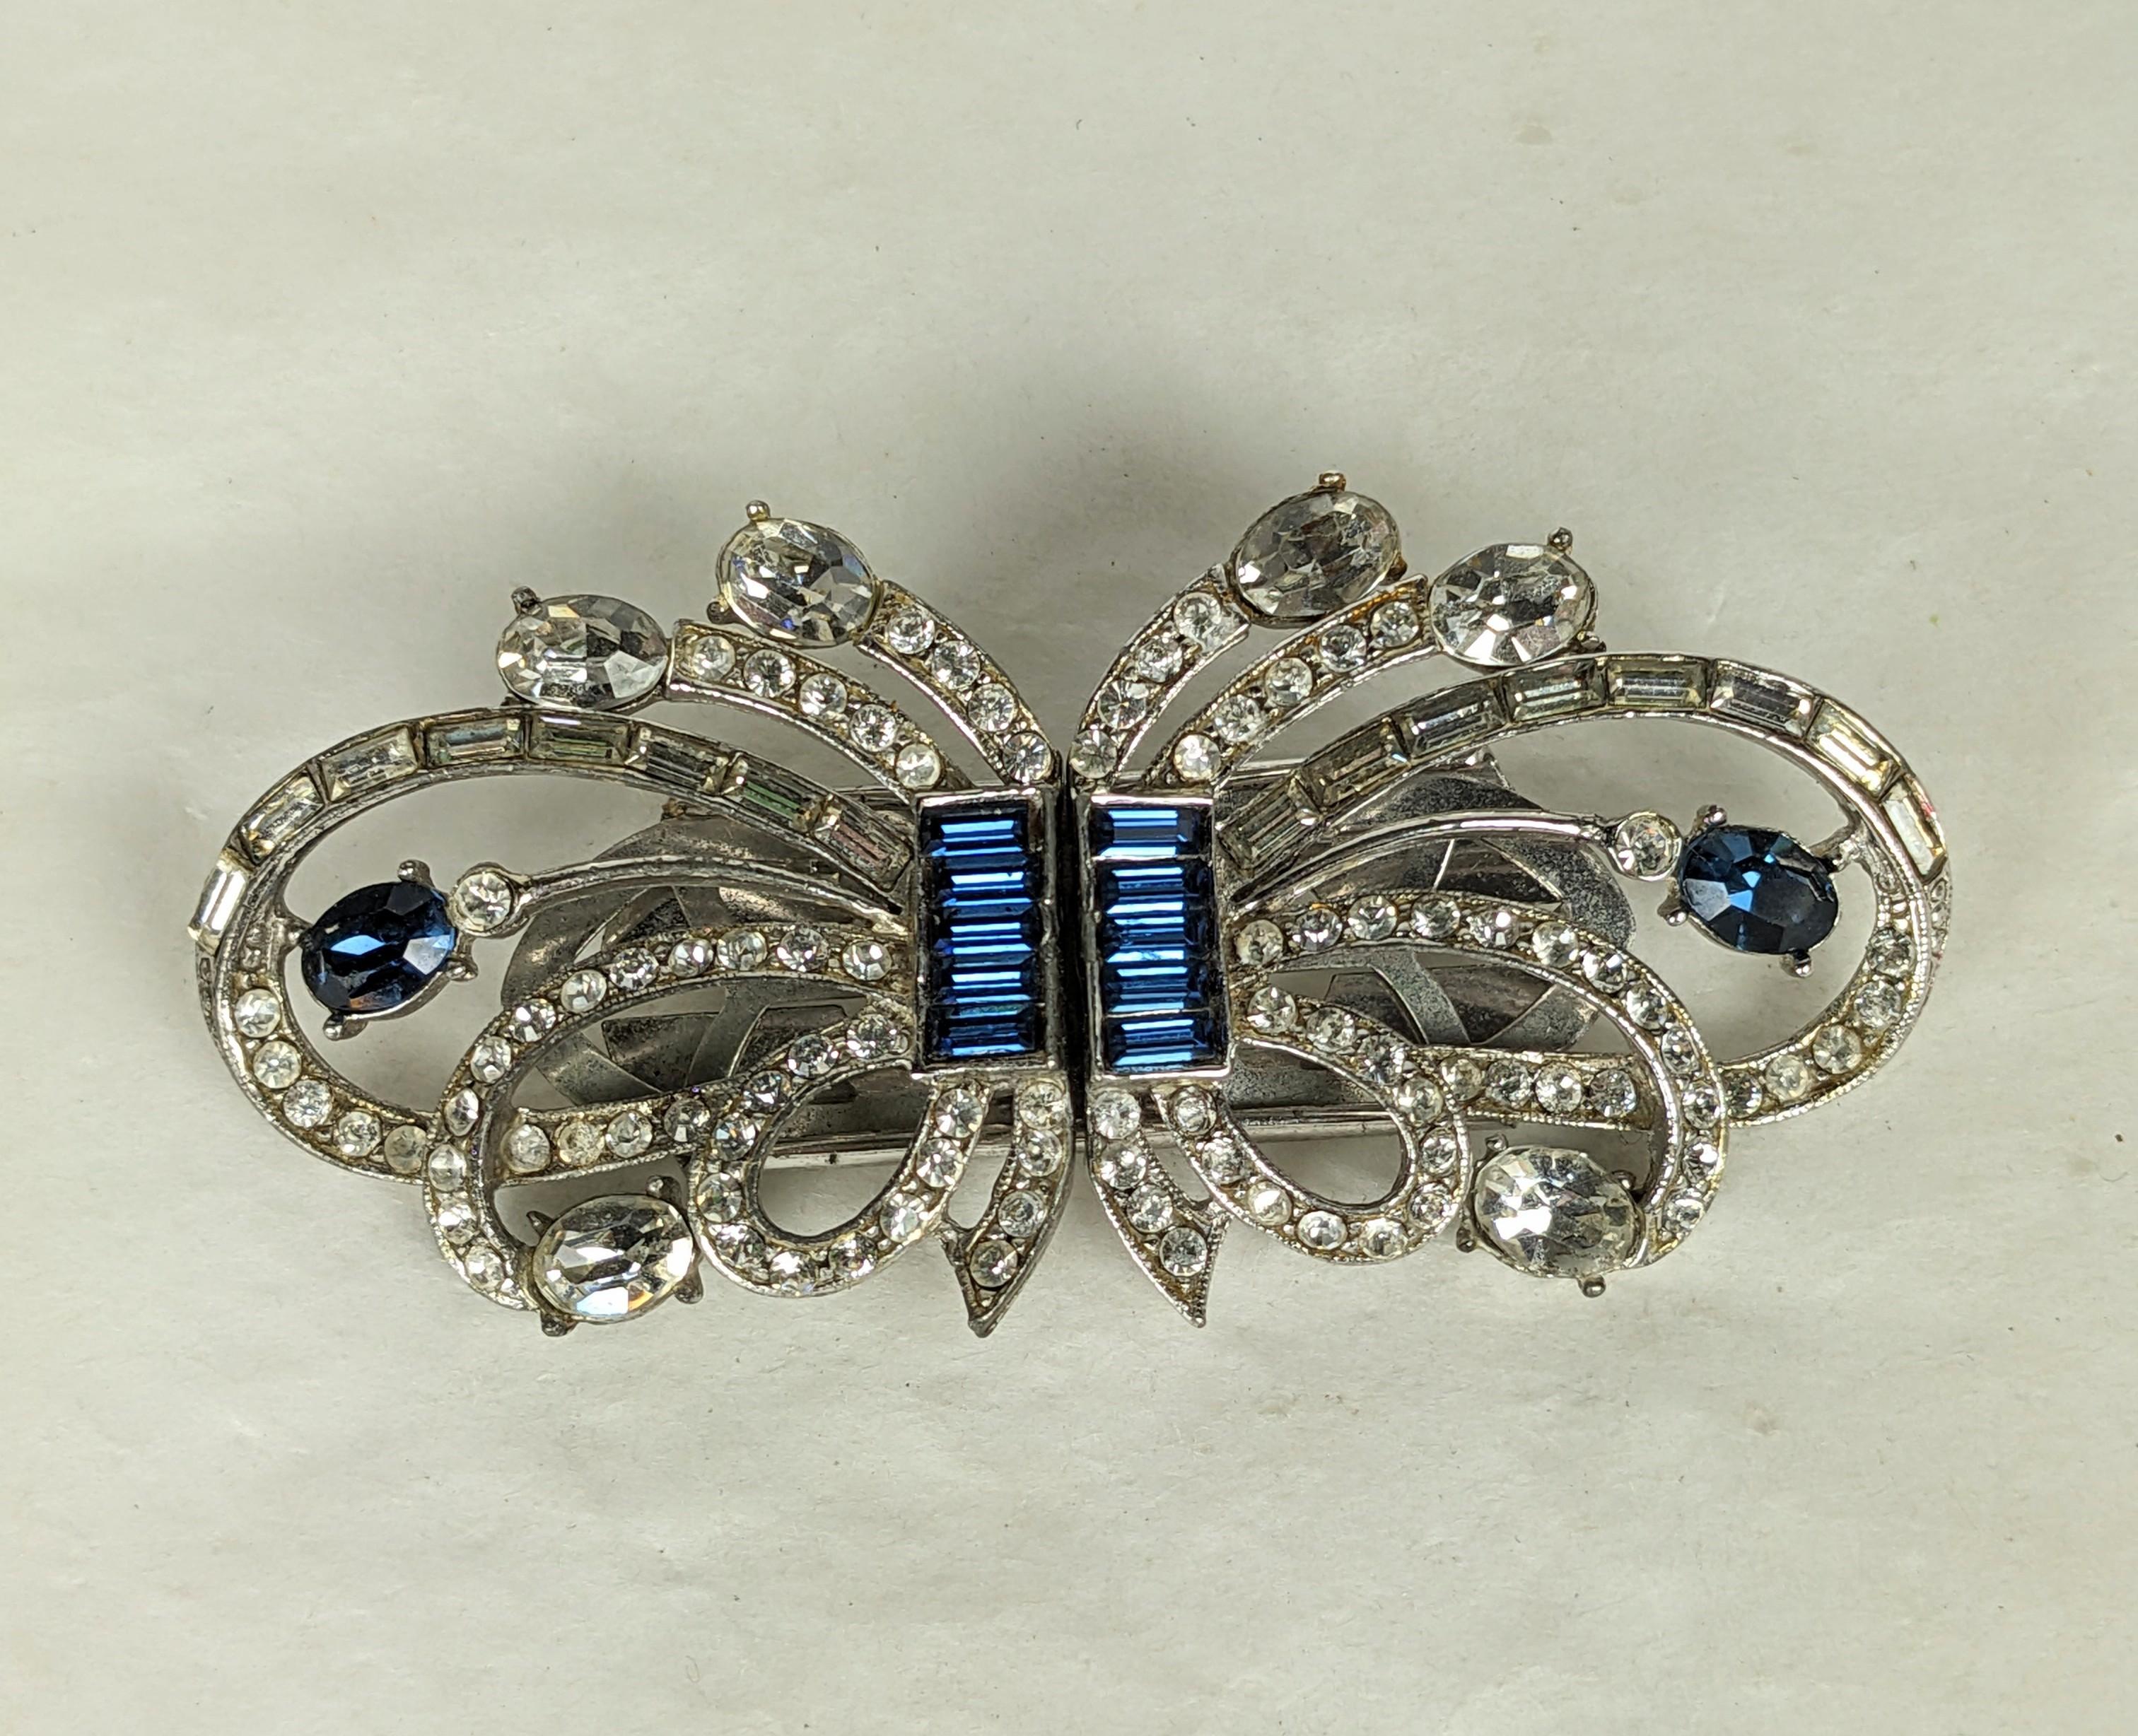 Art Deco Sapphire Baguette Duette Brooch from the 1930's. High Art Deco design with pave crystal and sapphire baguettes and ovals. Clips separate off frame to form 2 dress clips for lapels or neckline. Unsigned. 1930's USA. 3